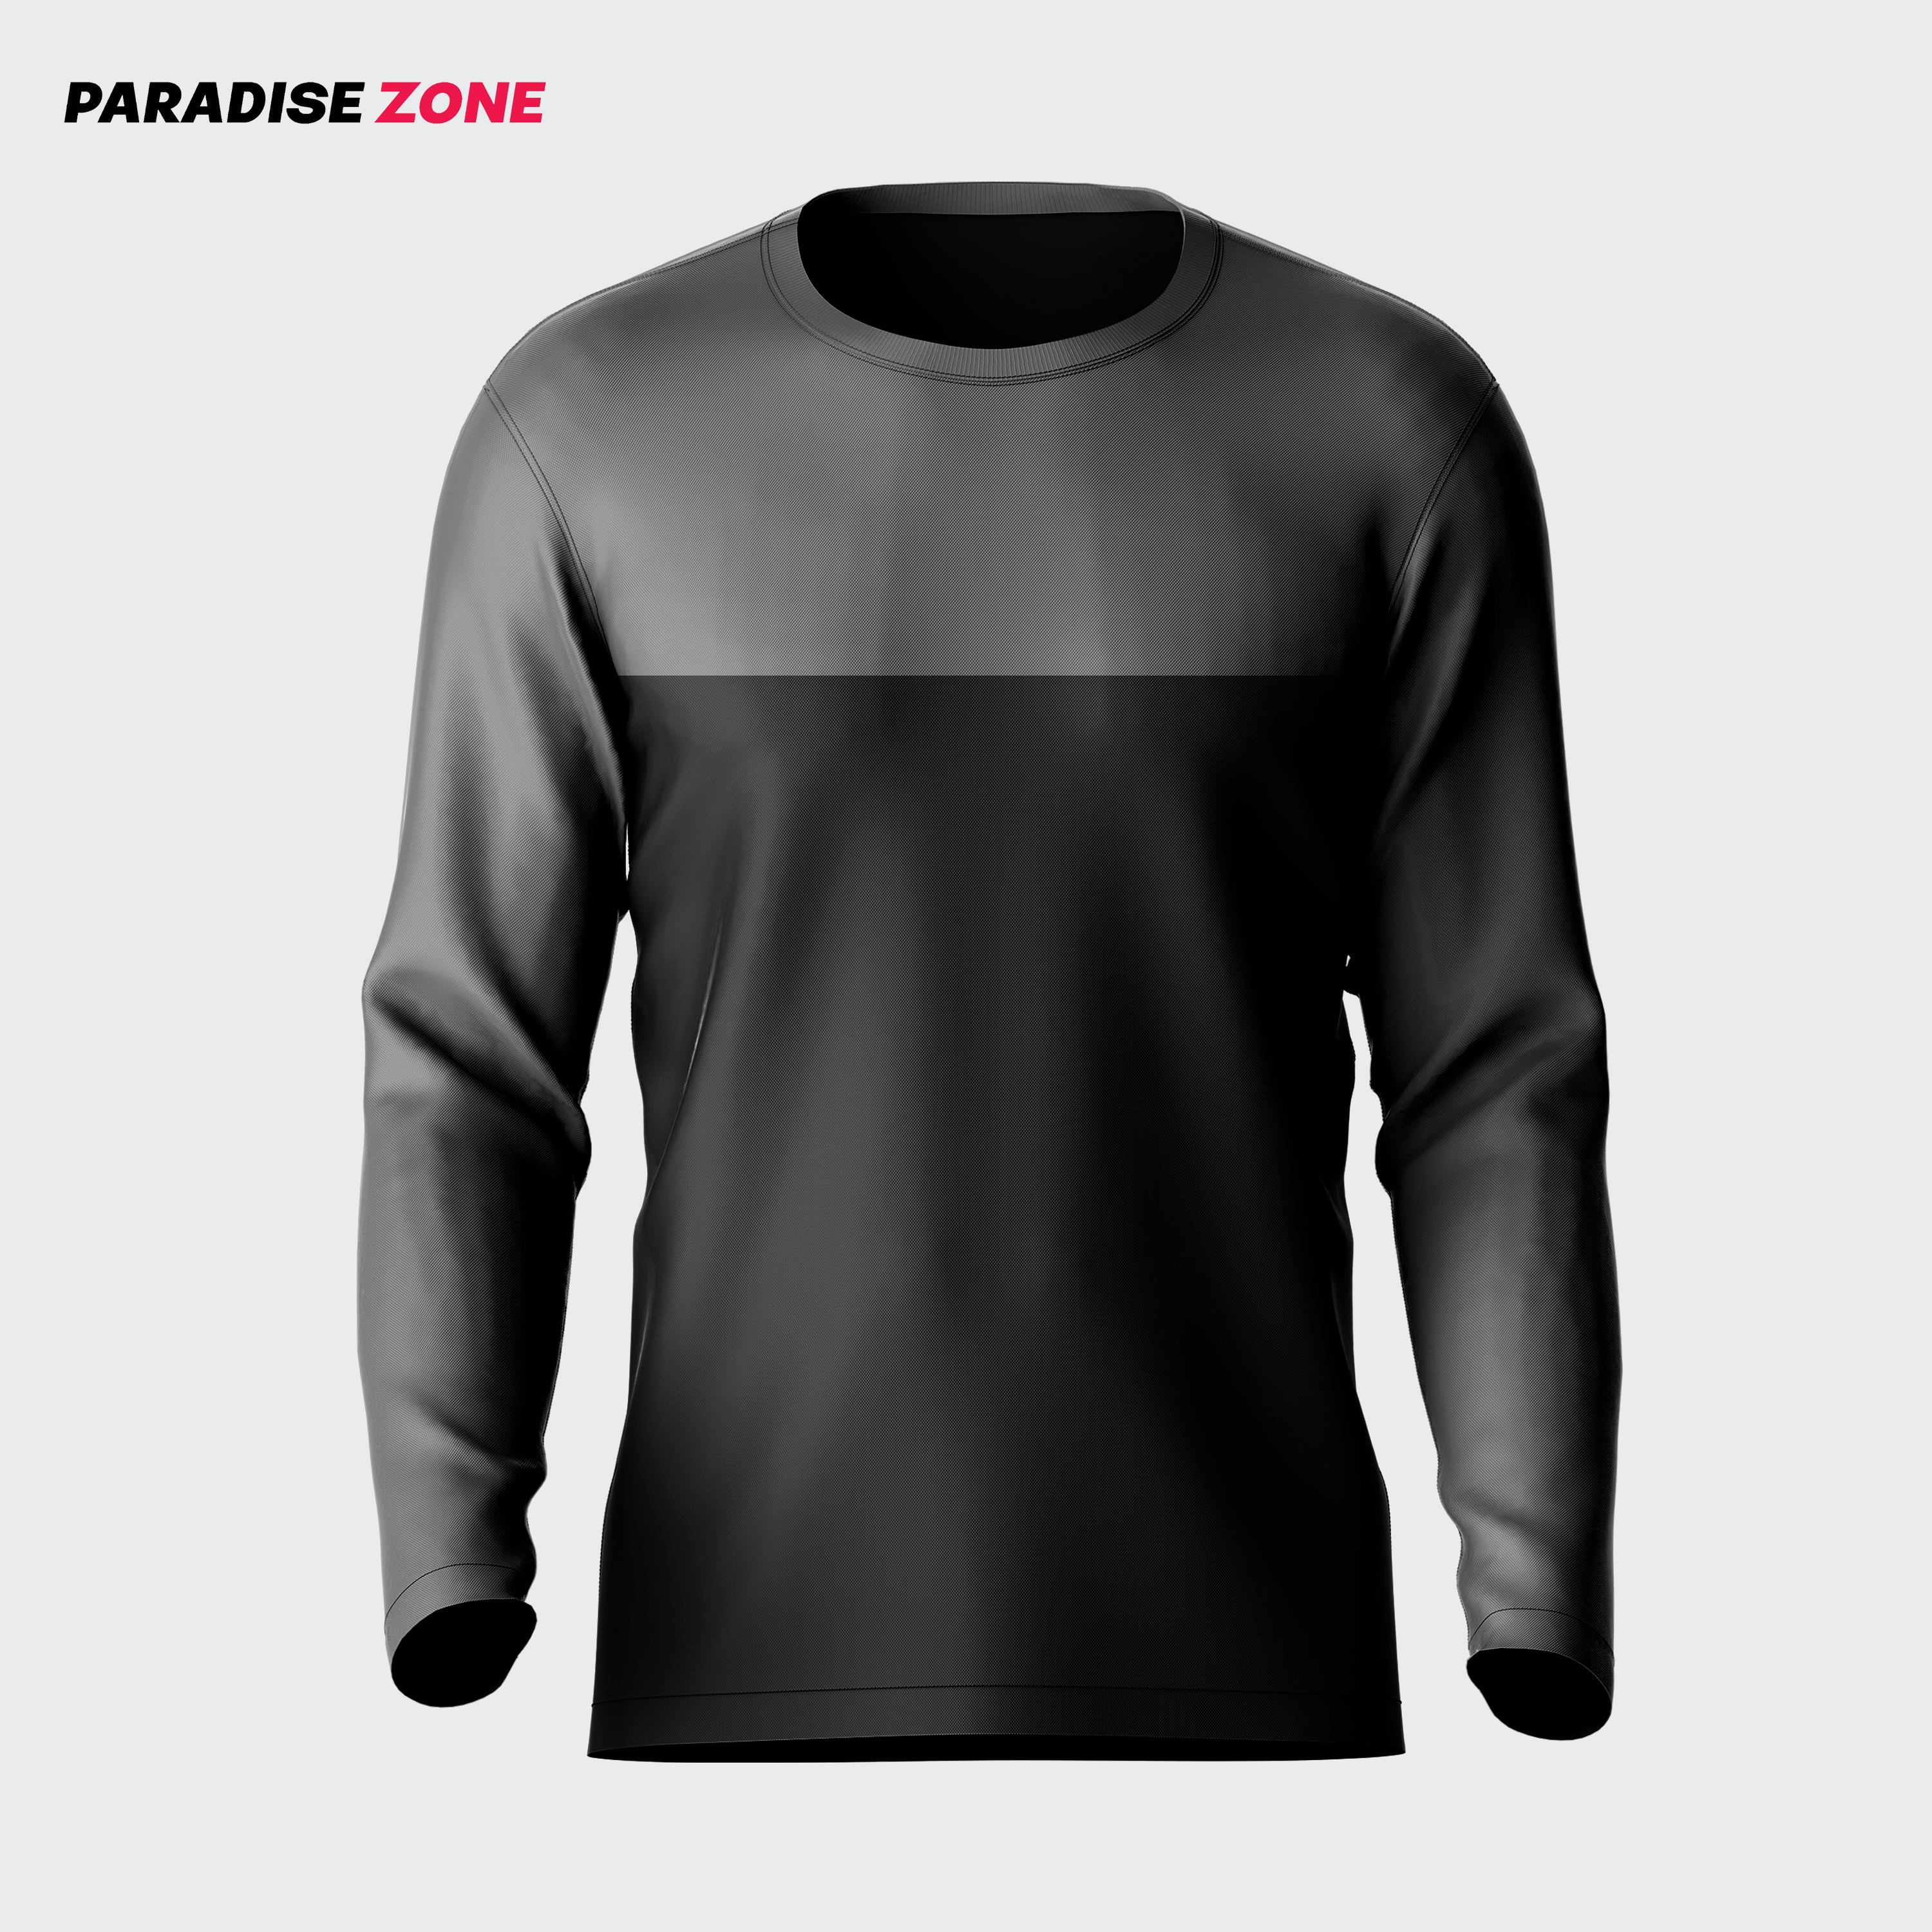 New Long Sleeves Contrast Panel Fashion Multi-colored Tshirt For Men